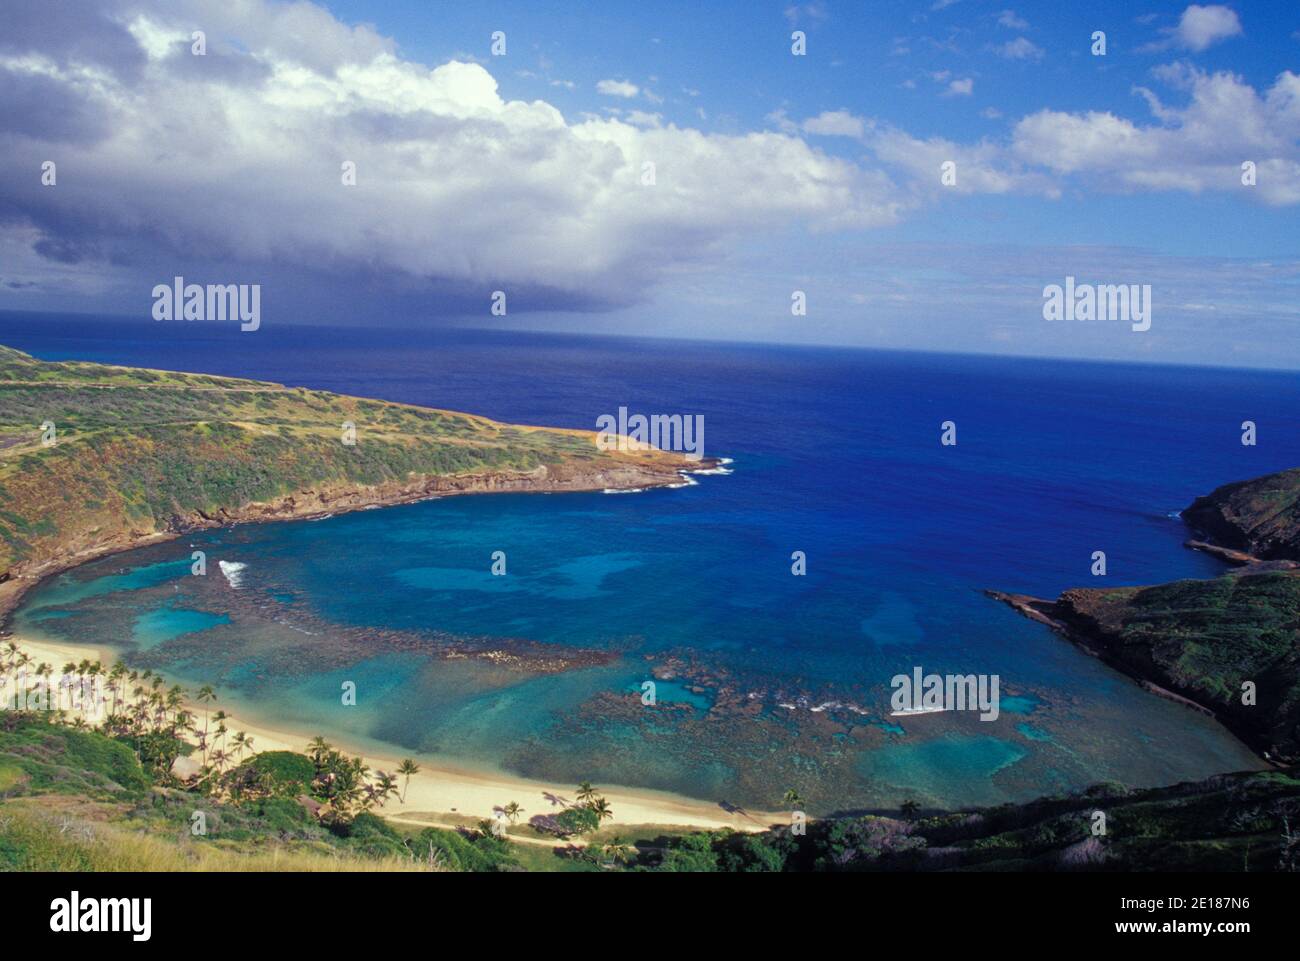 White sand beach and clear blue water over reef, seen from above Hanauma Bay, Oahu, Hawaii Stock Photo